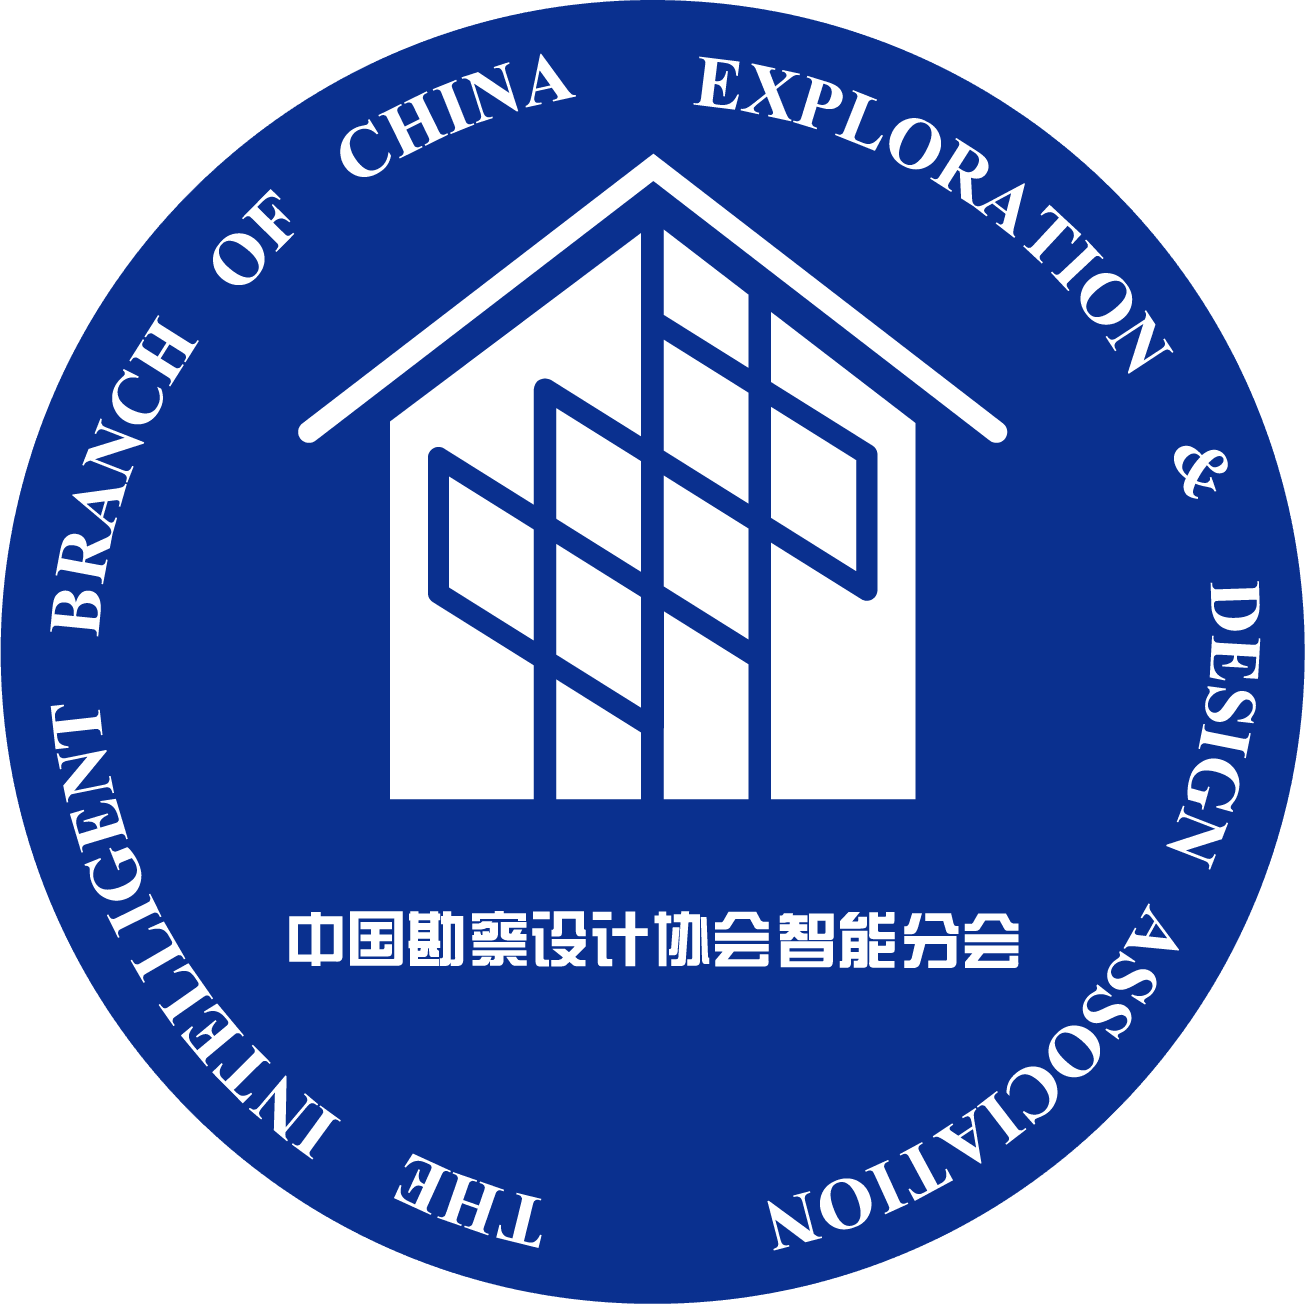 The Intelligent Engineering Branch of China Exploration and Design Association